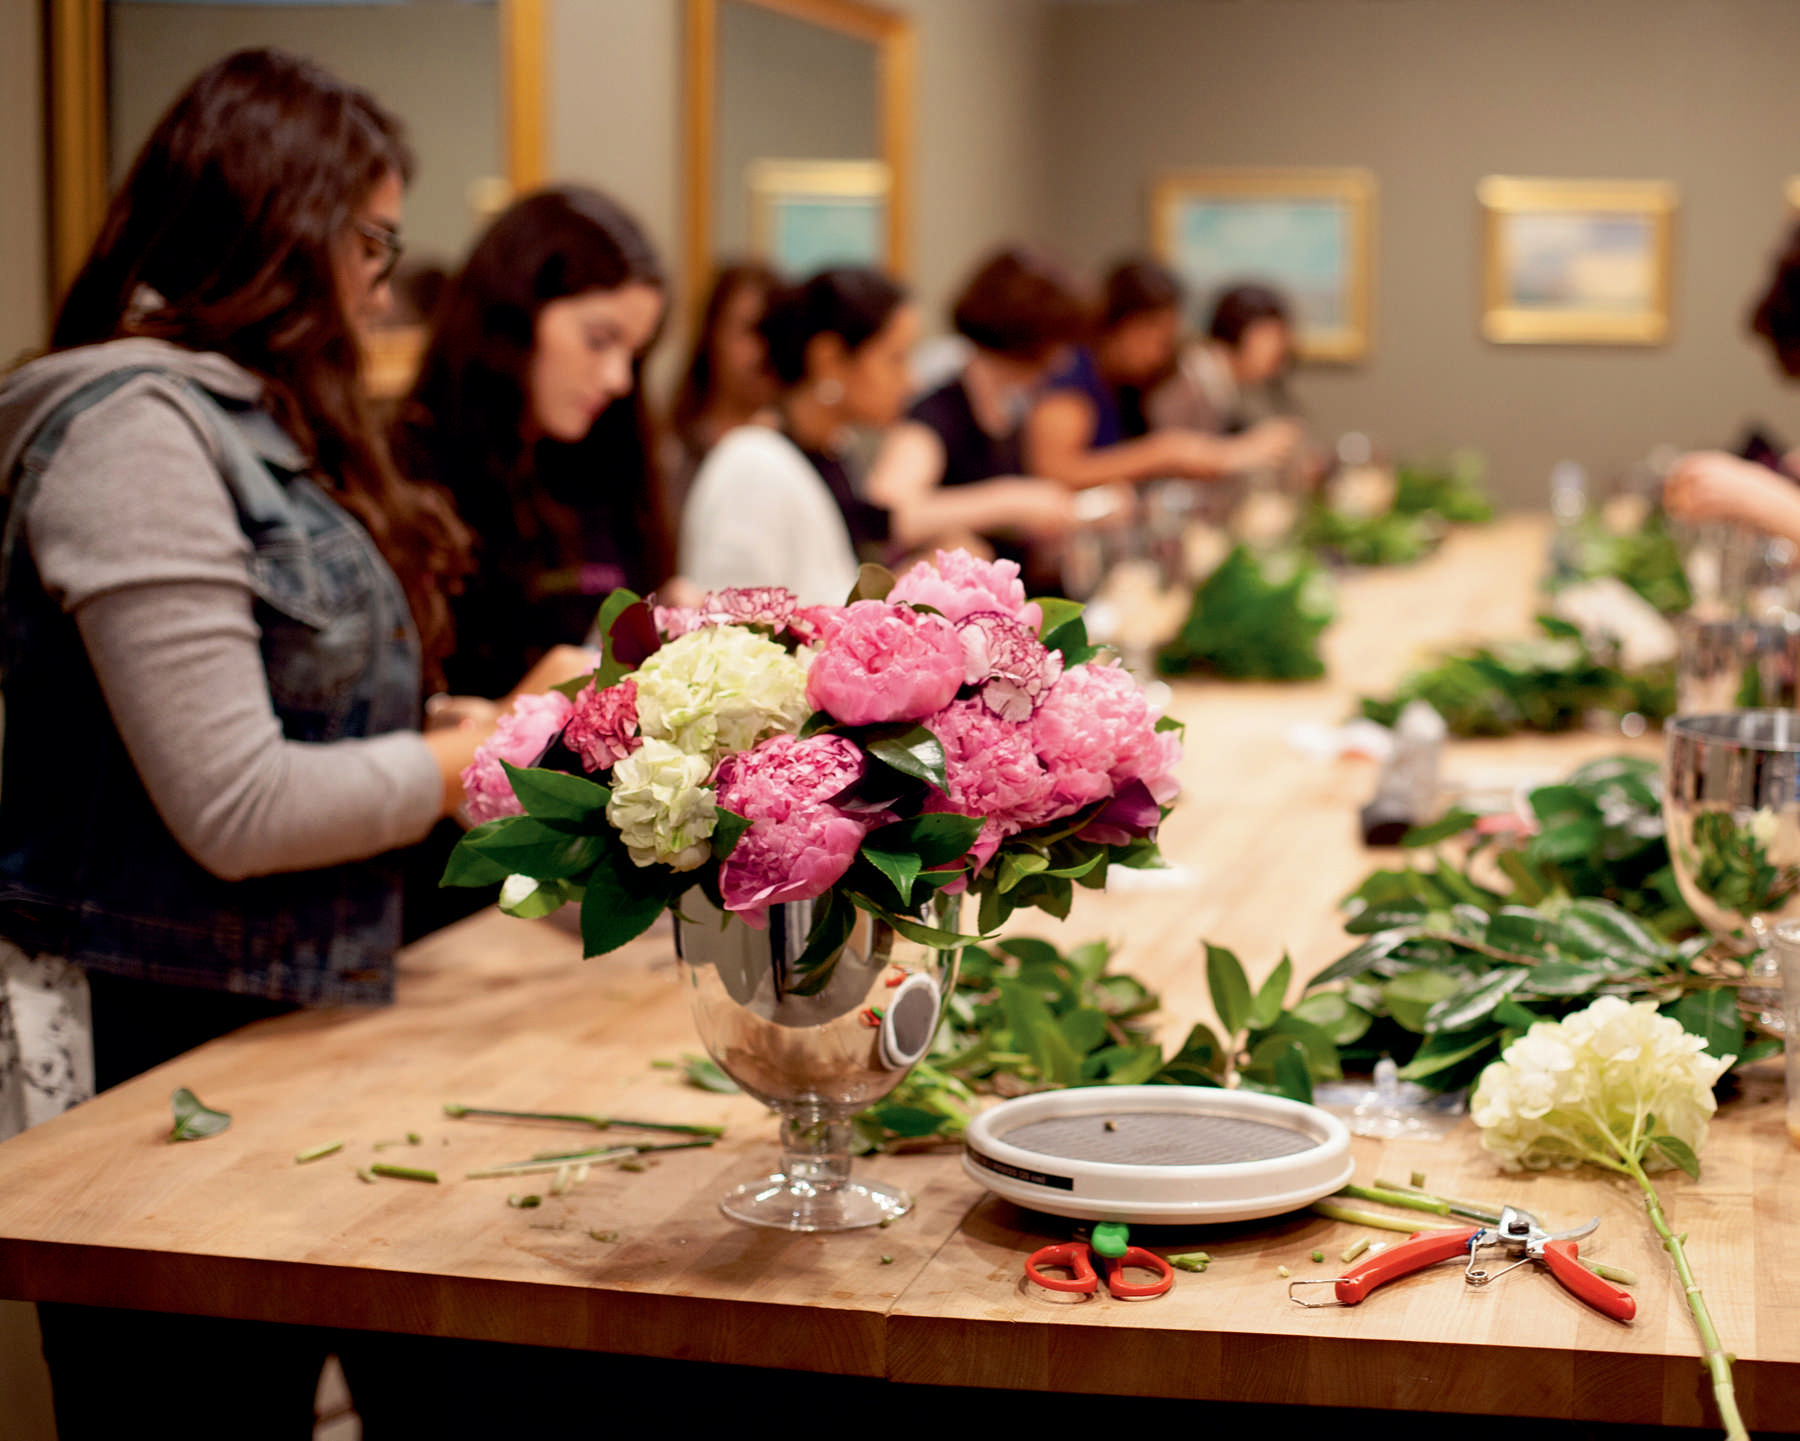 A group of burgeoning florists practices the fundamentals of flower arranging - photo 8